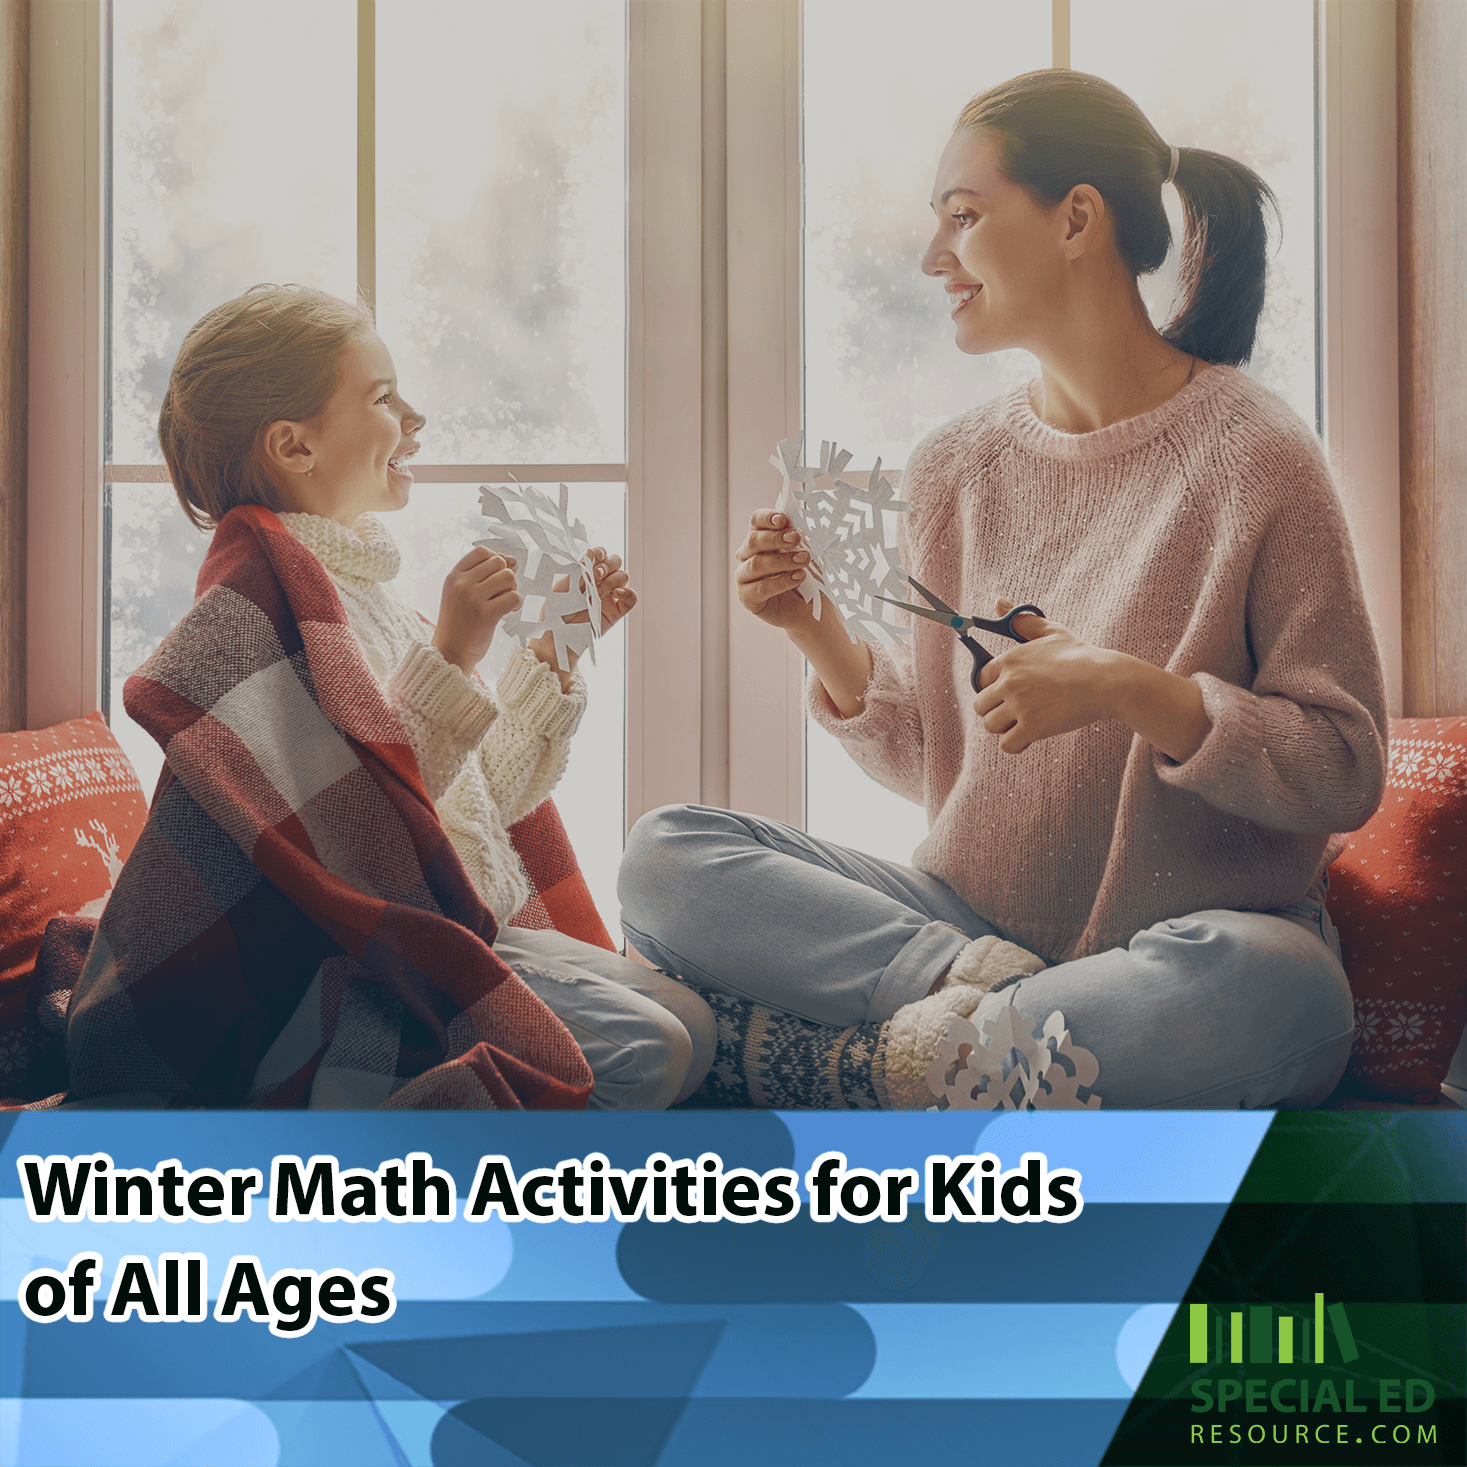 Enjoying one of these fun winter math activities for kids: Mother and daughter crafting paper snowflakes at home in front of the window.